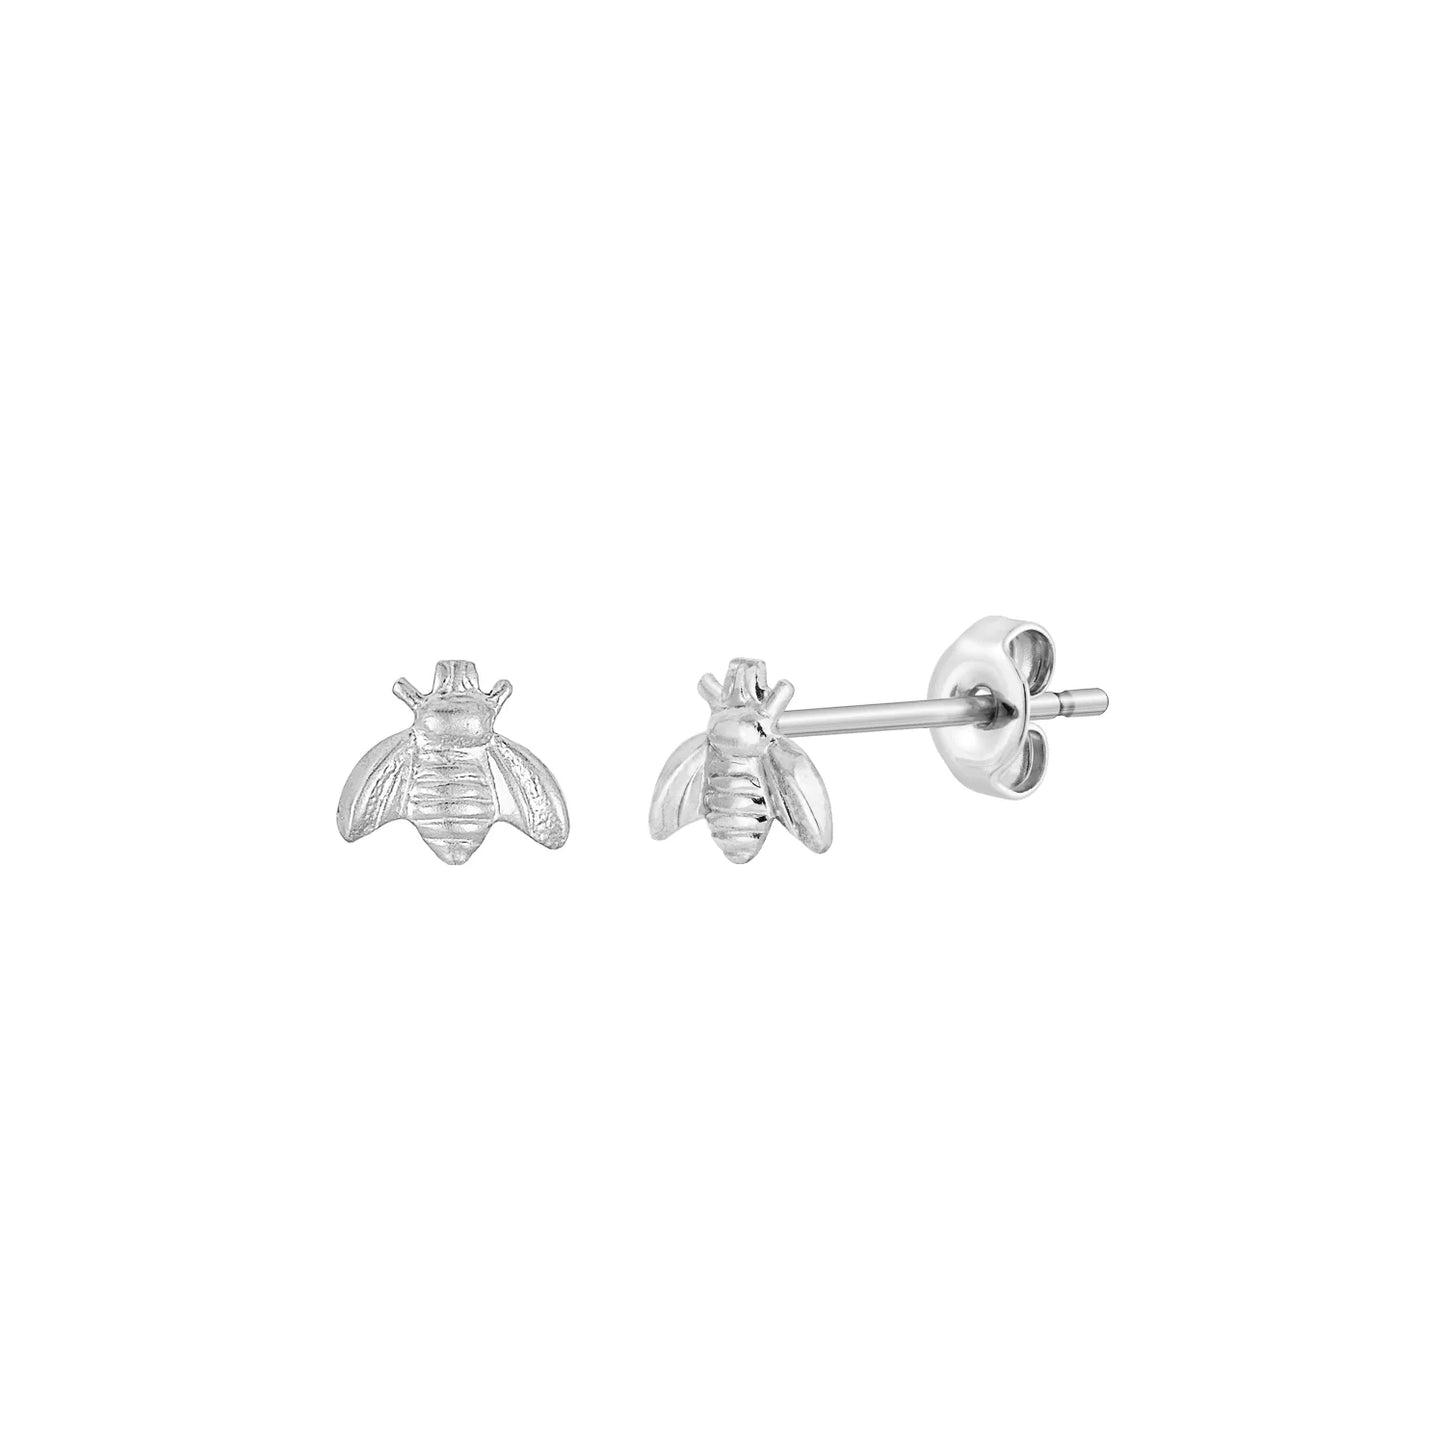 Silver Save the Bees Earrings and Wildflower Seeds